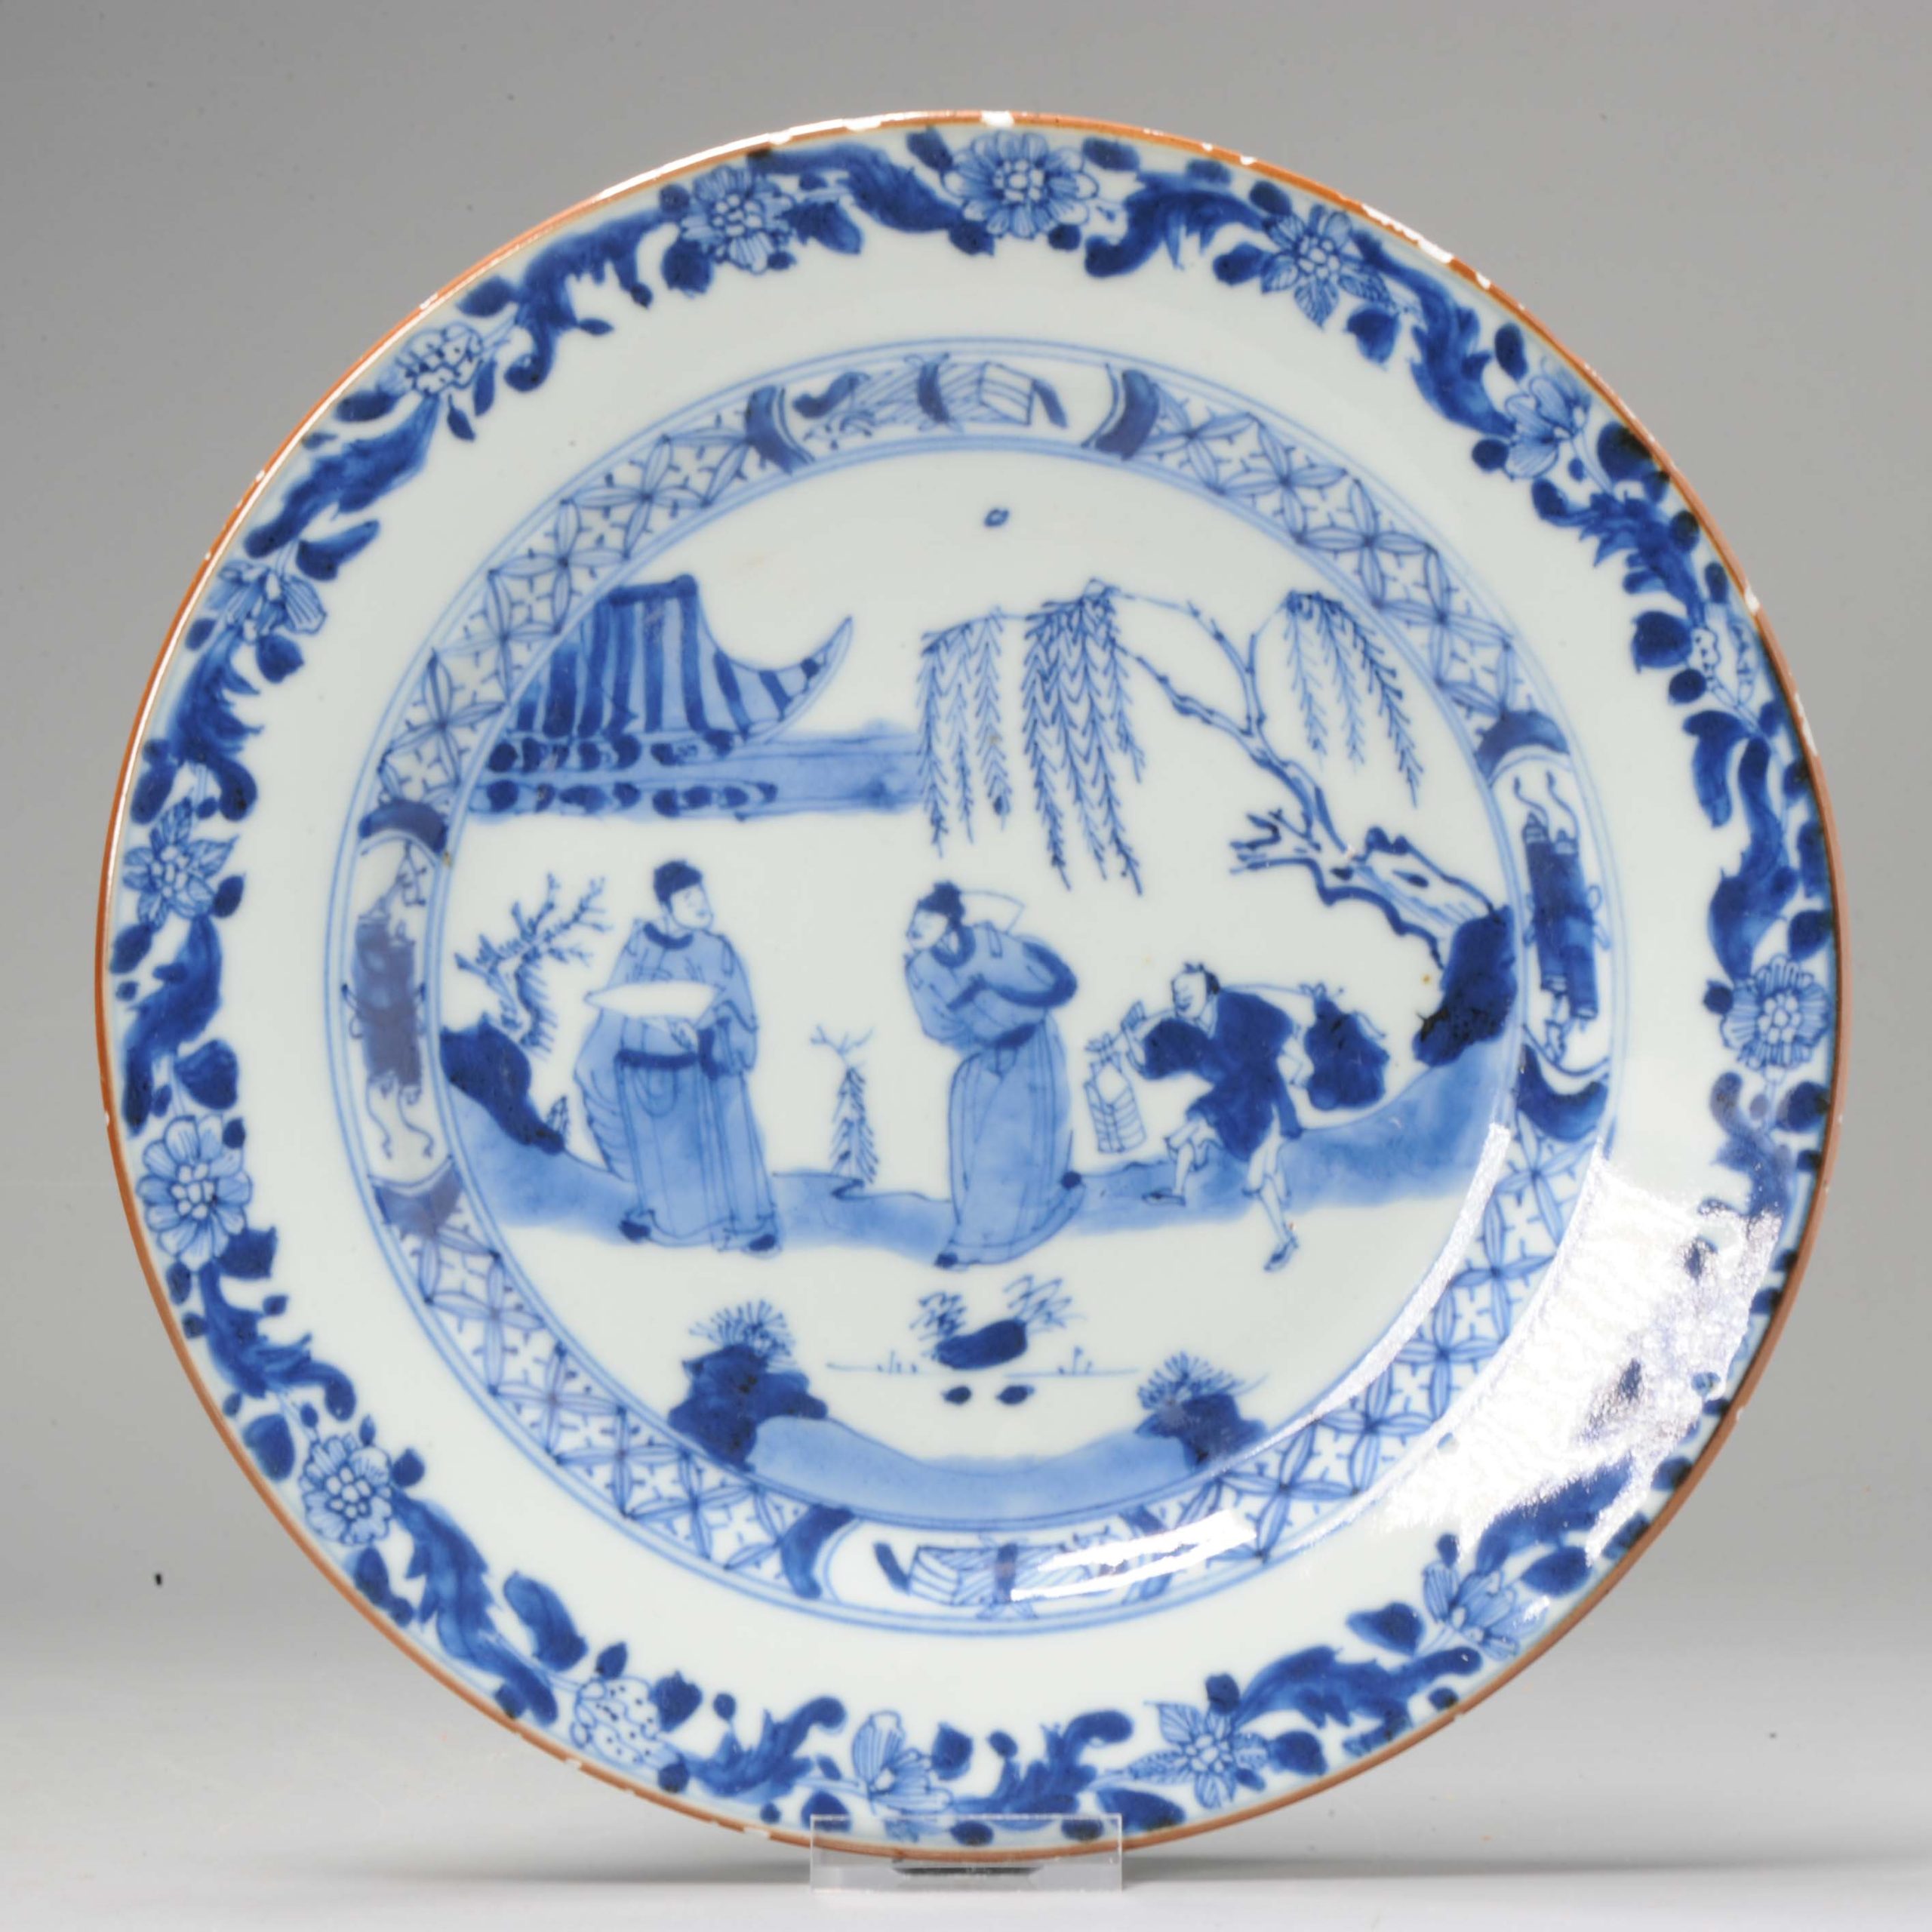 A Rare Yongzheng period Chinese porcelain Plate with Figures landscape.